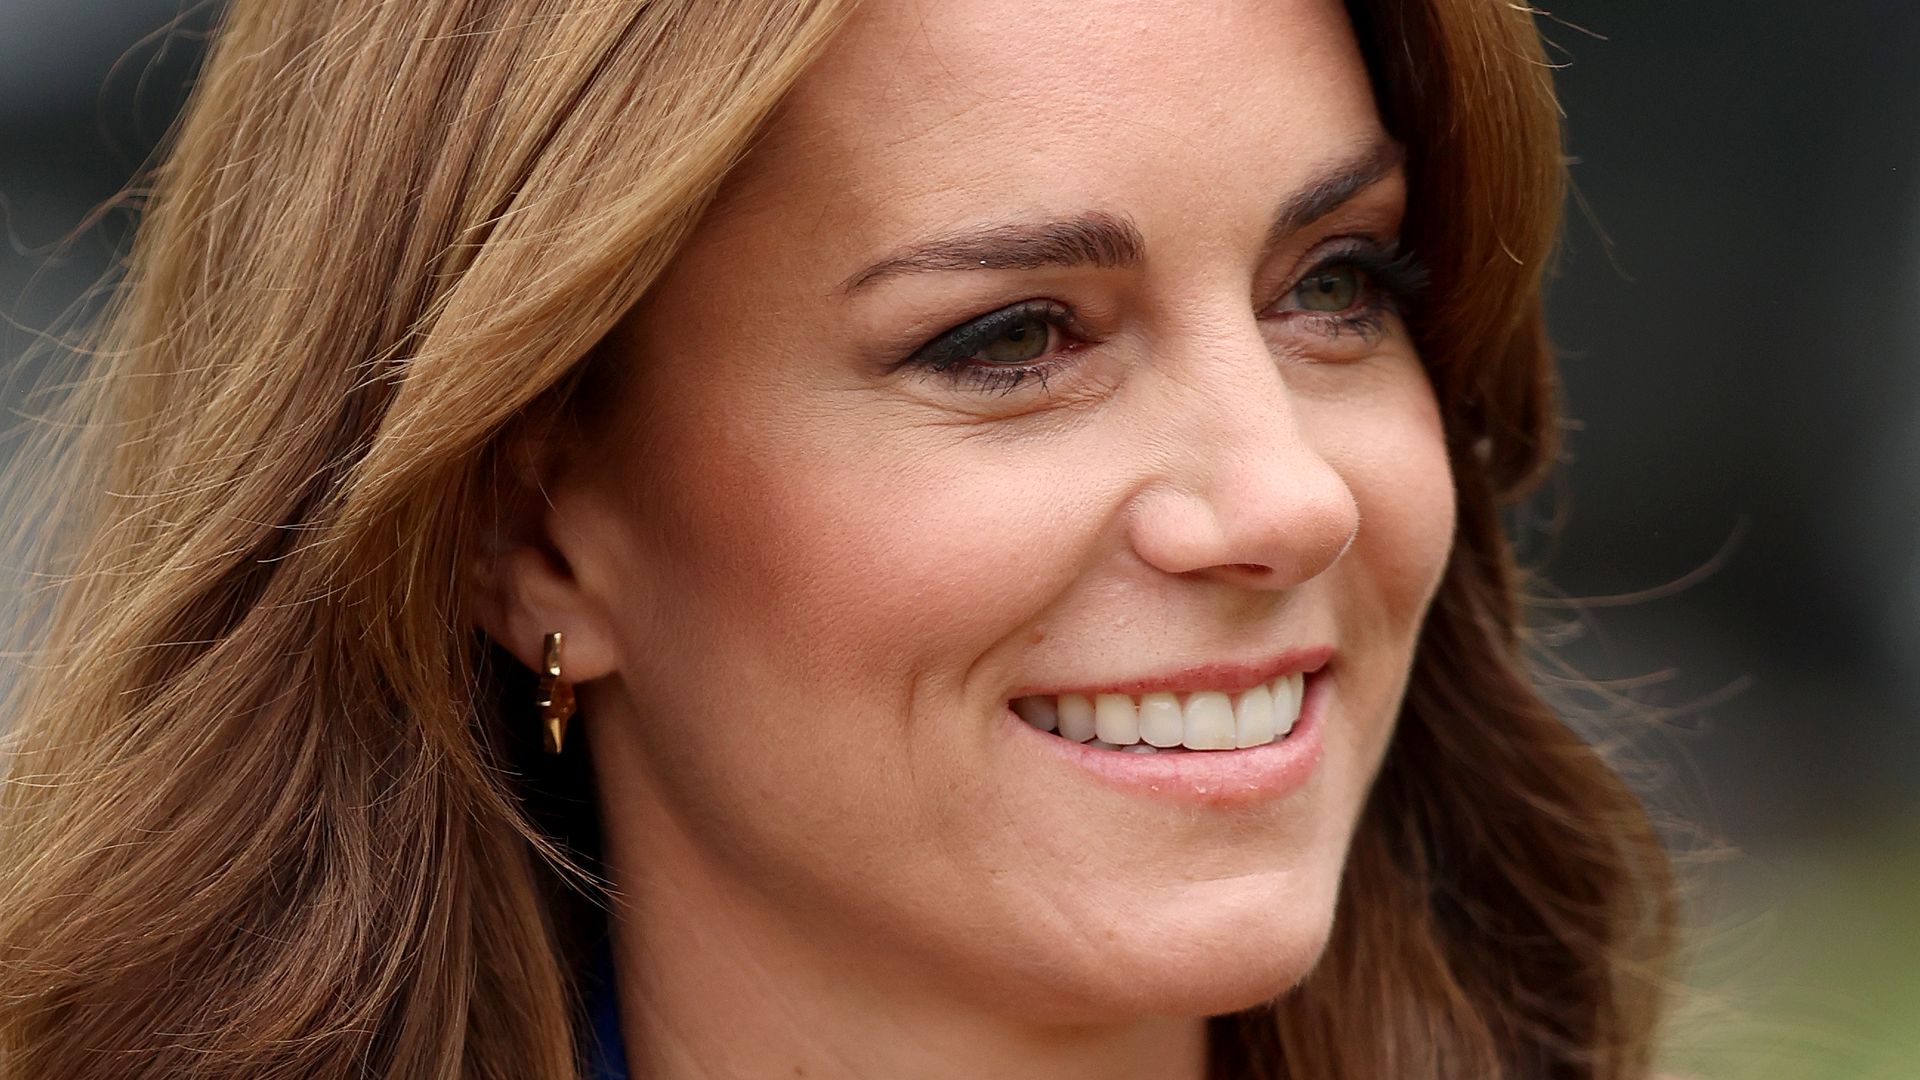 The heartbreaking story behind Princess Kate's earrings – and how she helped raise £10k for mental health charity